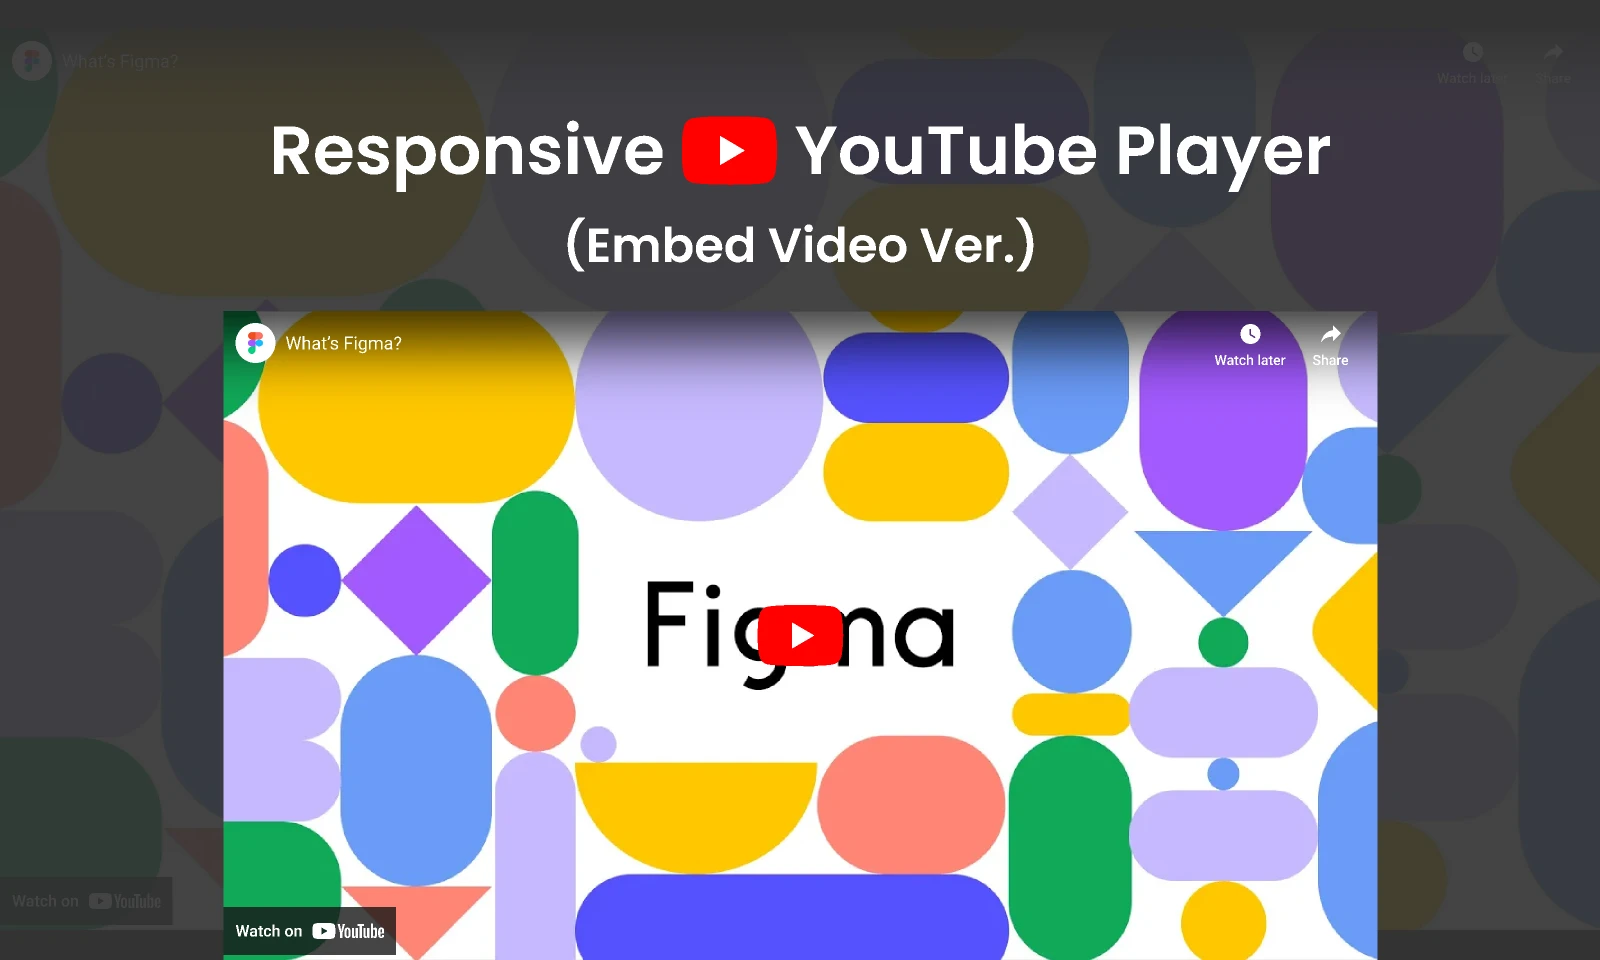  Responsive YouTube Player (Embed Video) for Figma and Adobe XD